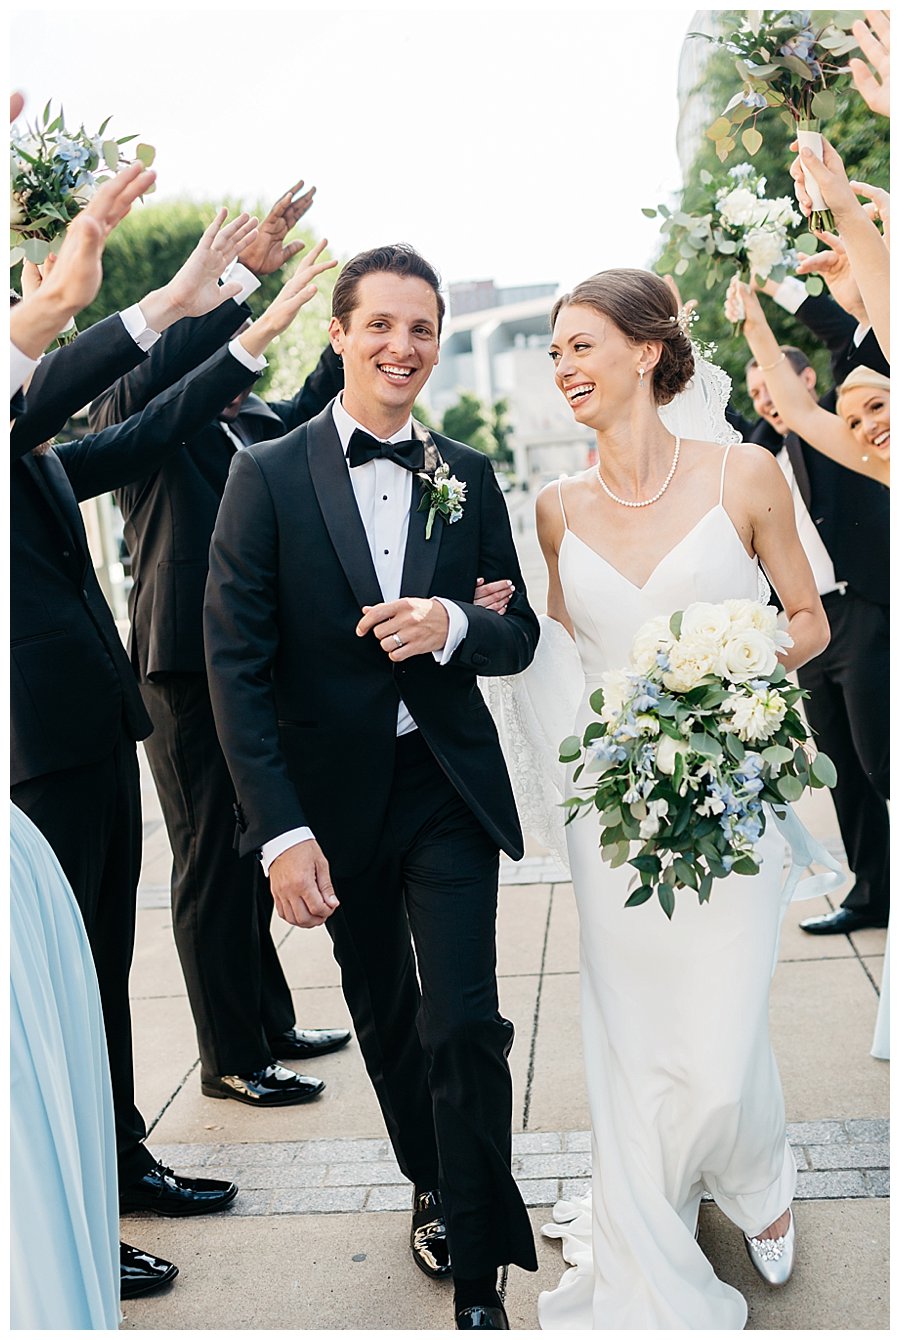 Nashville Symphony wedding photography by Meredith Teasley featured on Nashville bride guide